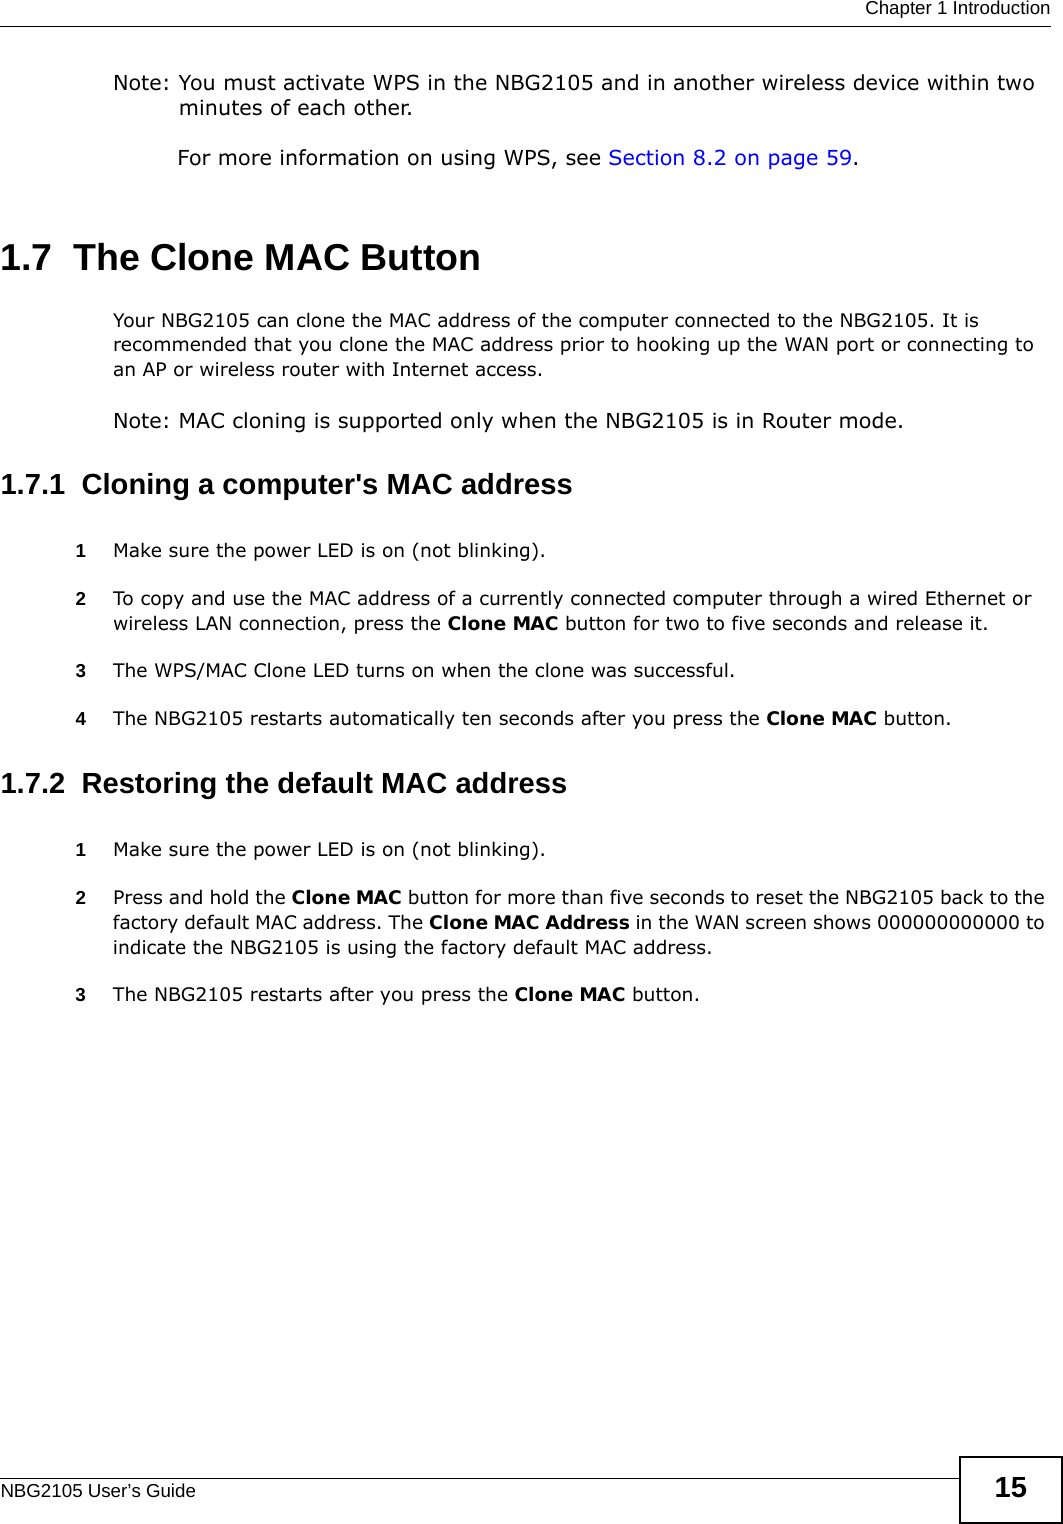  Chapter 1 IntroductionNBG2105 User’s Guide 15Note: You must activate WPS in the NBG2105 and in another wireless device within two minutes of each other. For more information on using WPS, see Section 8.2 on page 59.1.7  The Clone MAC ButtonYour NBG2105 can clone the MAC address of the computer connected to the NBG2105. It is recommended that you clone the MAC address prior to hooking up the WAN port or connecting to an AP or wireless router with Internet access.Note: MAC cloning is supported only when the NBG2105 is in Router mode.1.7.1  Cloning a computer&apos;s MAC address1Make sure the power LED is on (not blinking).2To copy and use the MAC address of a currently connected computer through a wired Ethernet or wireless LAN connection, press the Clone MAC button for two to five seconds and release it. 3The WPS/MAC Clone LED turns on when the clone was successful.4The NBG2105 restarts automatically ten seconds after you press the Clone MAC button.1.7.2  Restoring the default MAC address1Make sure the power LED is on (not blinking).2Press and hold the Clone MAC button for more than five seconds to reset the NBG2105 back to the factory default MAC address. The Clone MAC Address in the WAN screen shows 000000000000 to indicate the NBG2105 is using the factory default MAC address.3The NBG2105 restarts after you press the Clone MAC button.